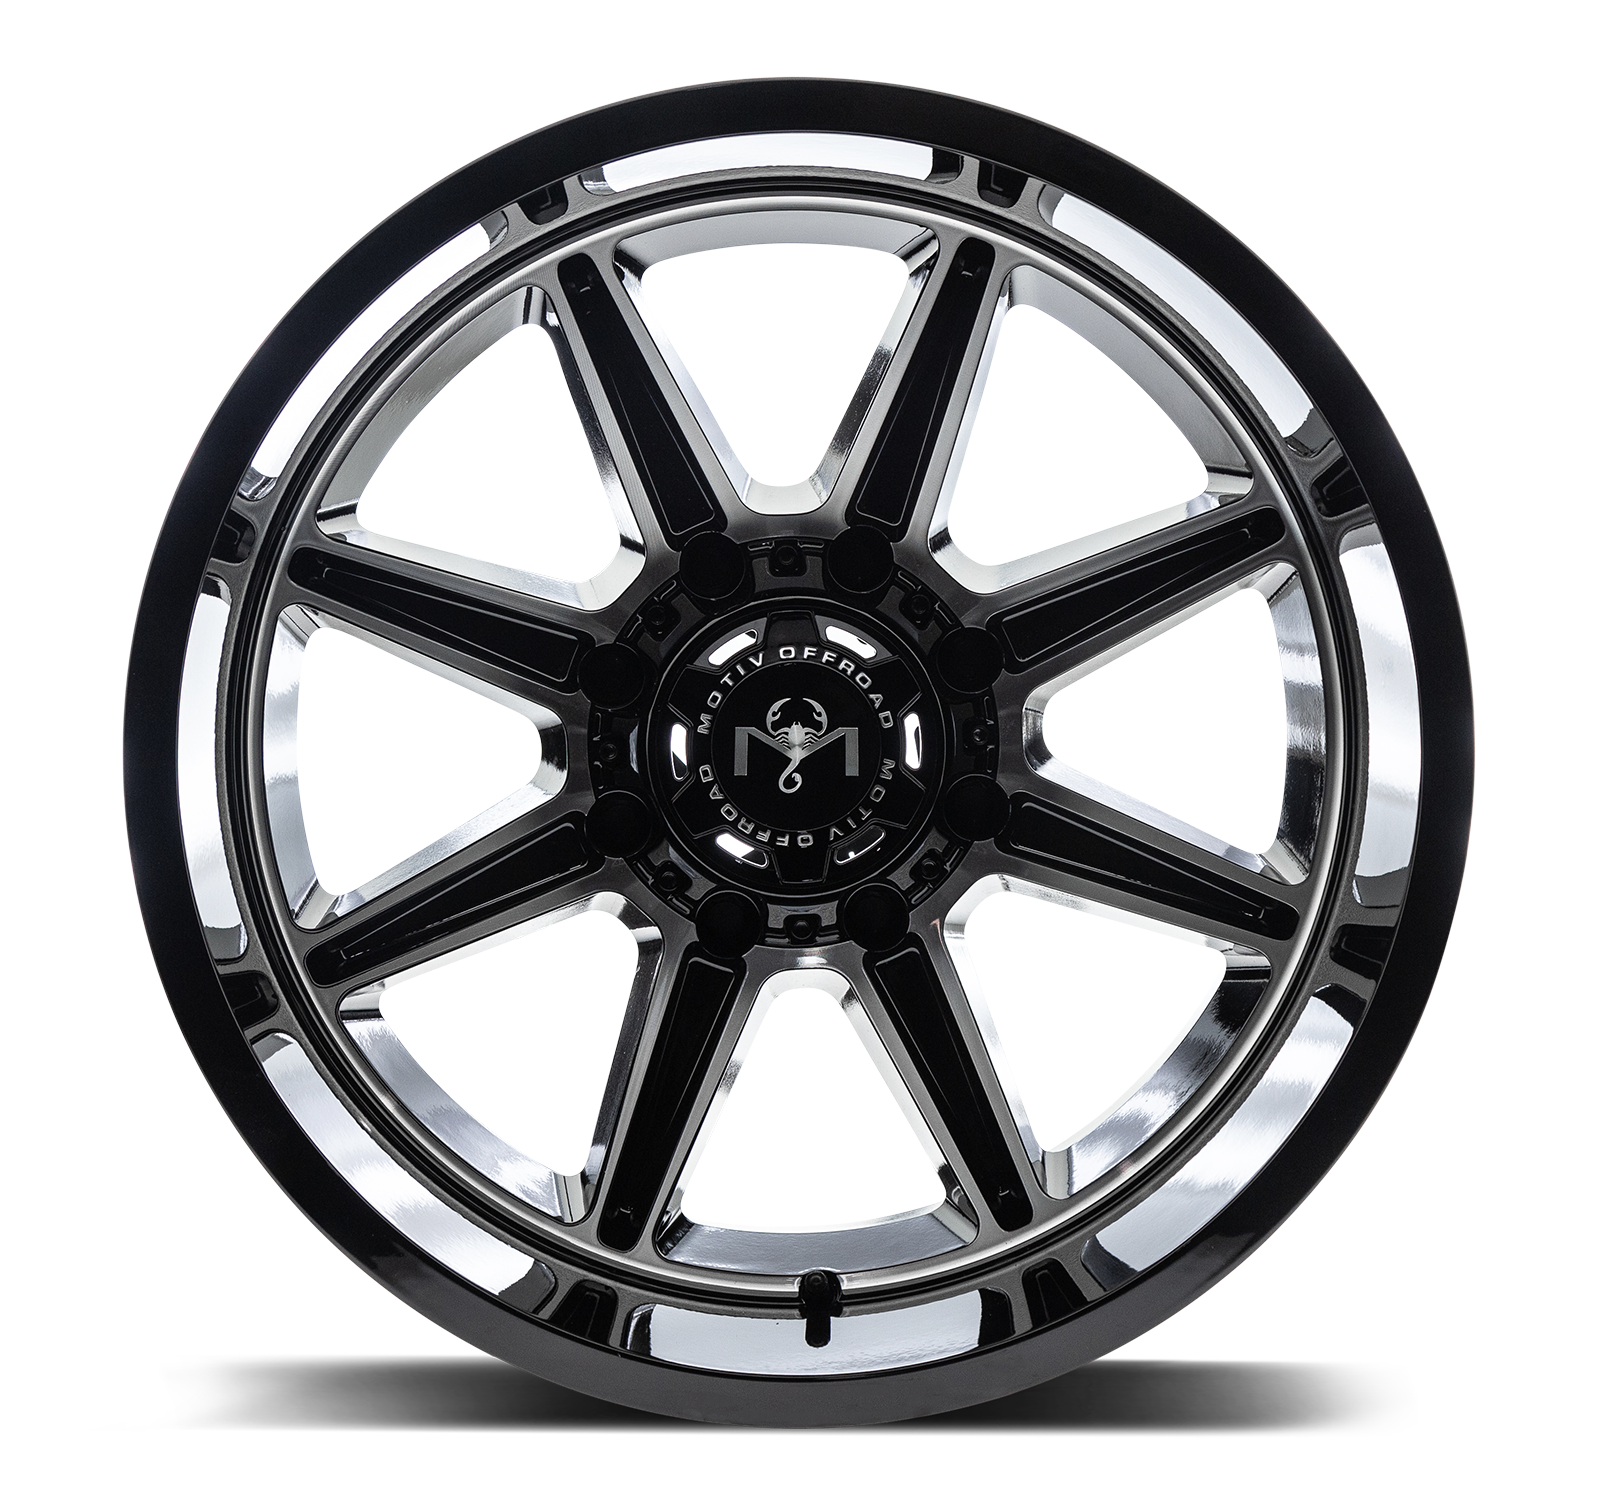 Motiv Off Road BALAST 20X10 -12 5X5.50/5X150 Gloss Black With Machined Face Accents